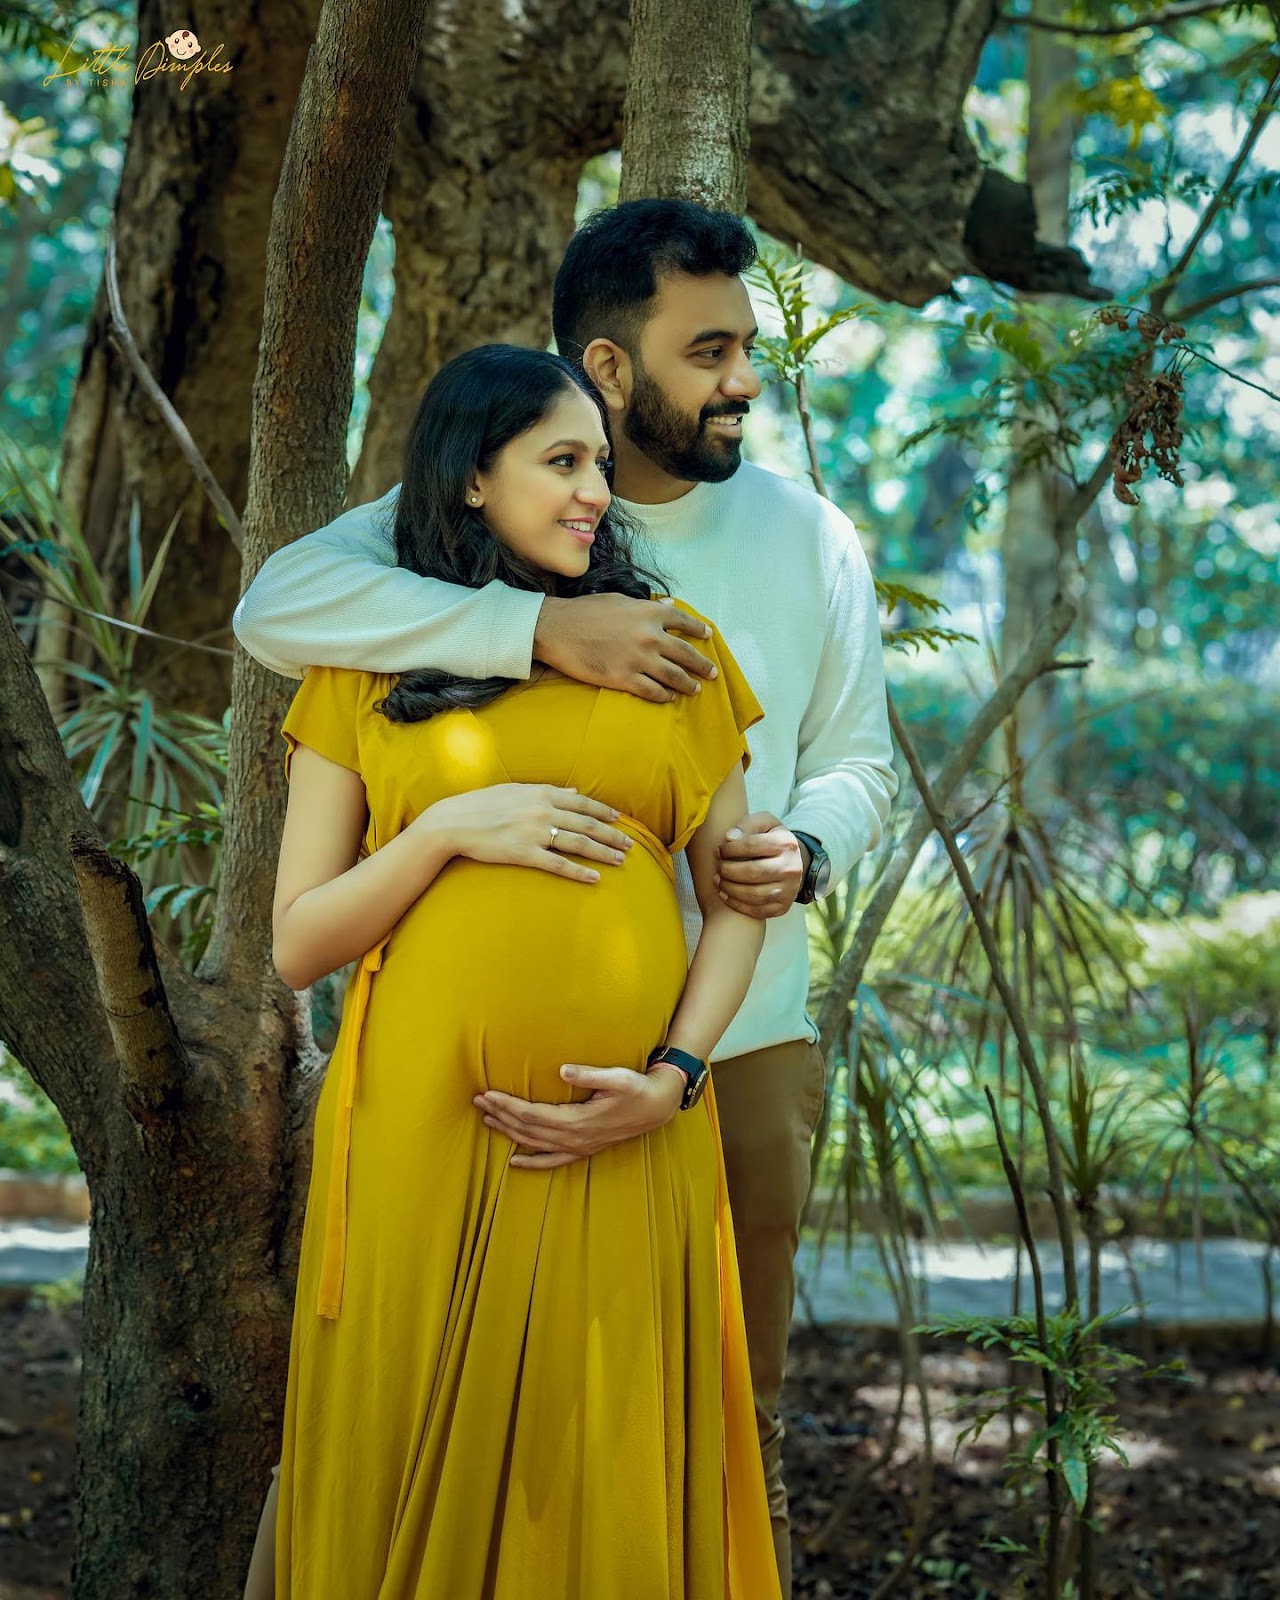 Little Dimples By Tisha is a well-known maternity photographer in Bangalore. Specialized in Maternity Photoshoot, pregnancy, and Baby Photoshoot Bangalore.